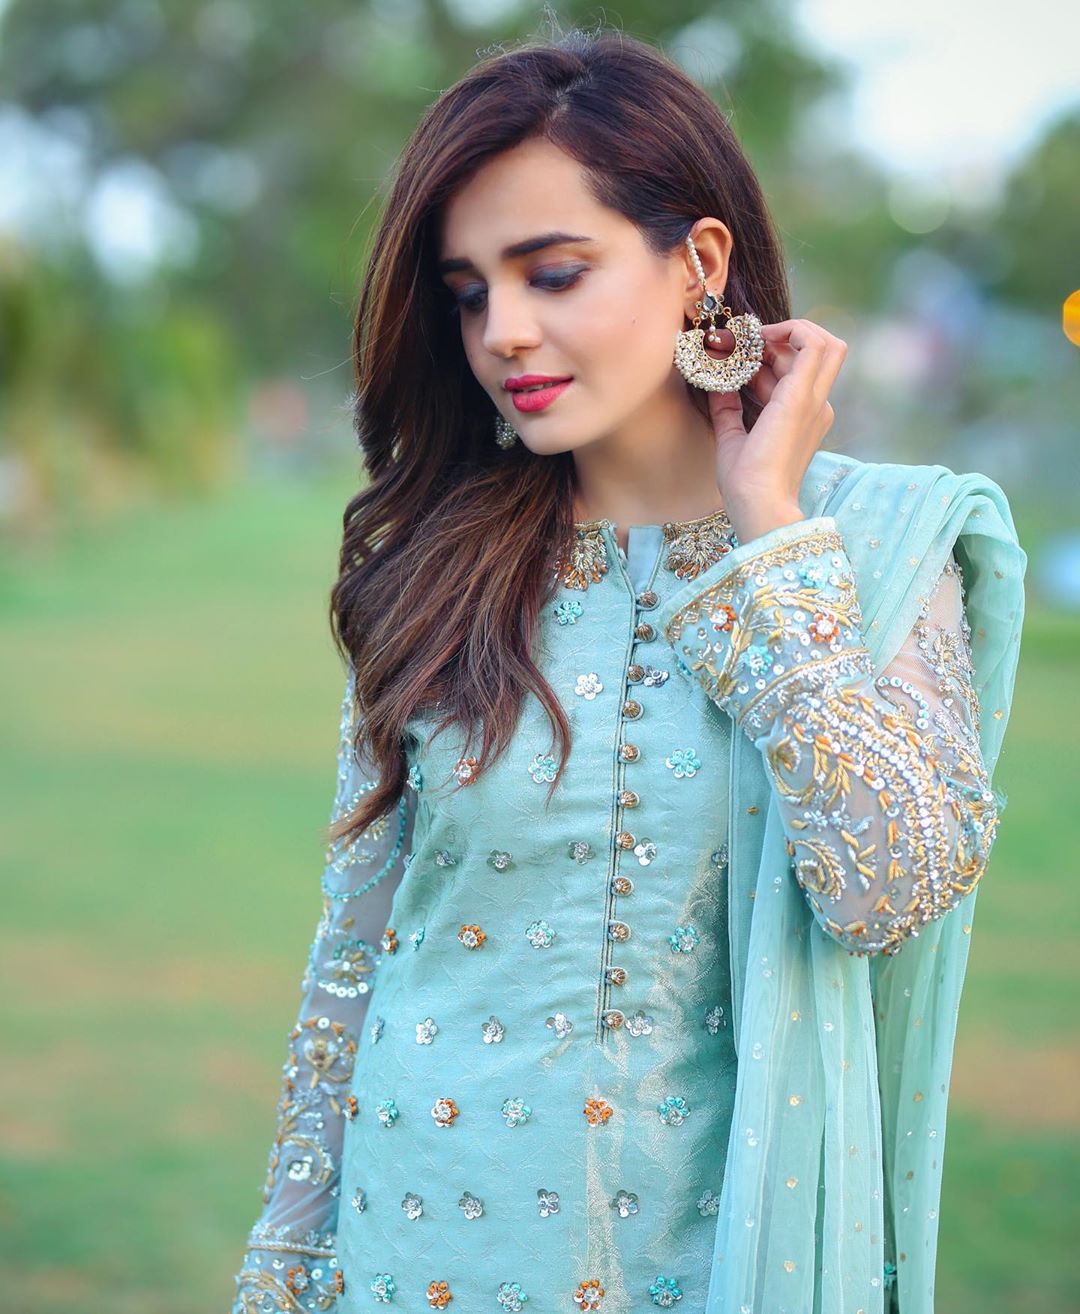 Actress Sumbul Iqbal Loking Gorgeous in Her New Pictures